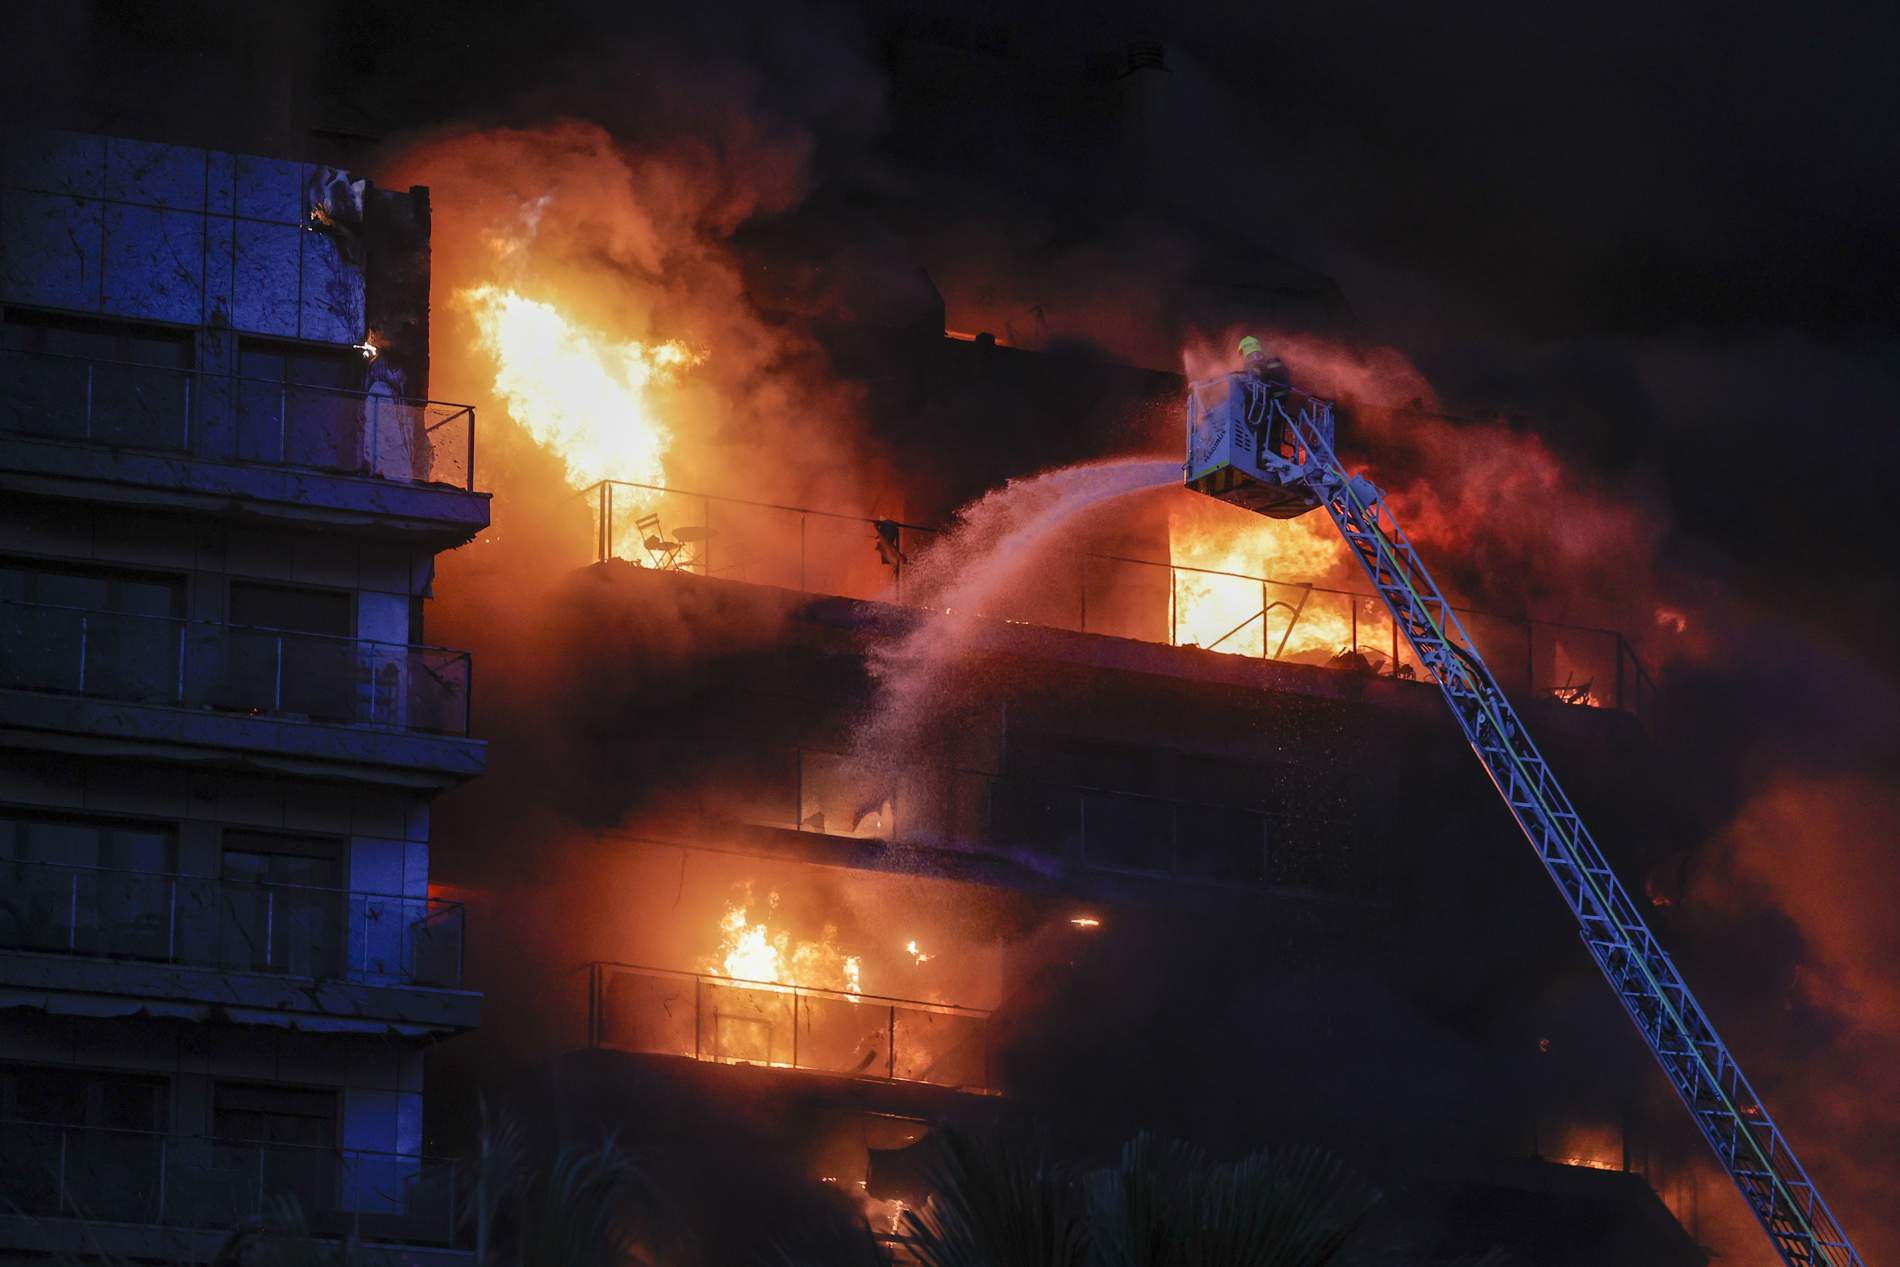 Four deaths confirmed and 19 missing after fire rips through 14-floor residential building in València